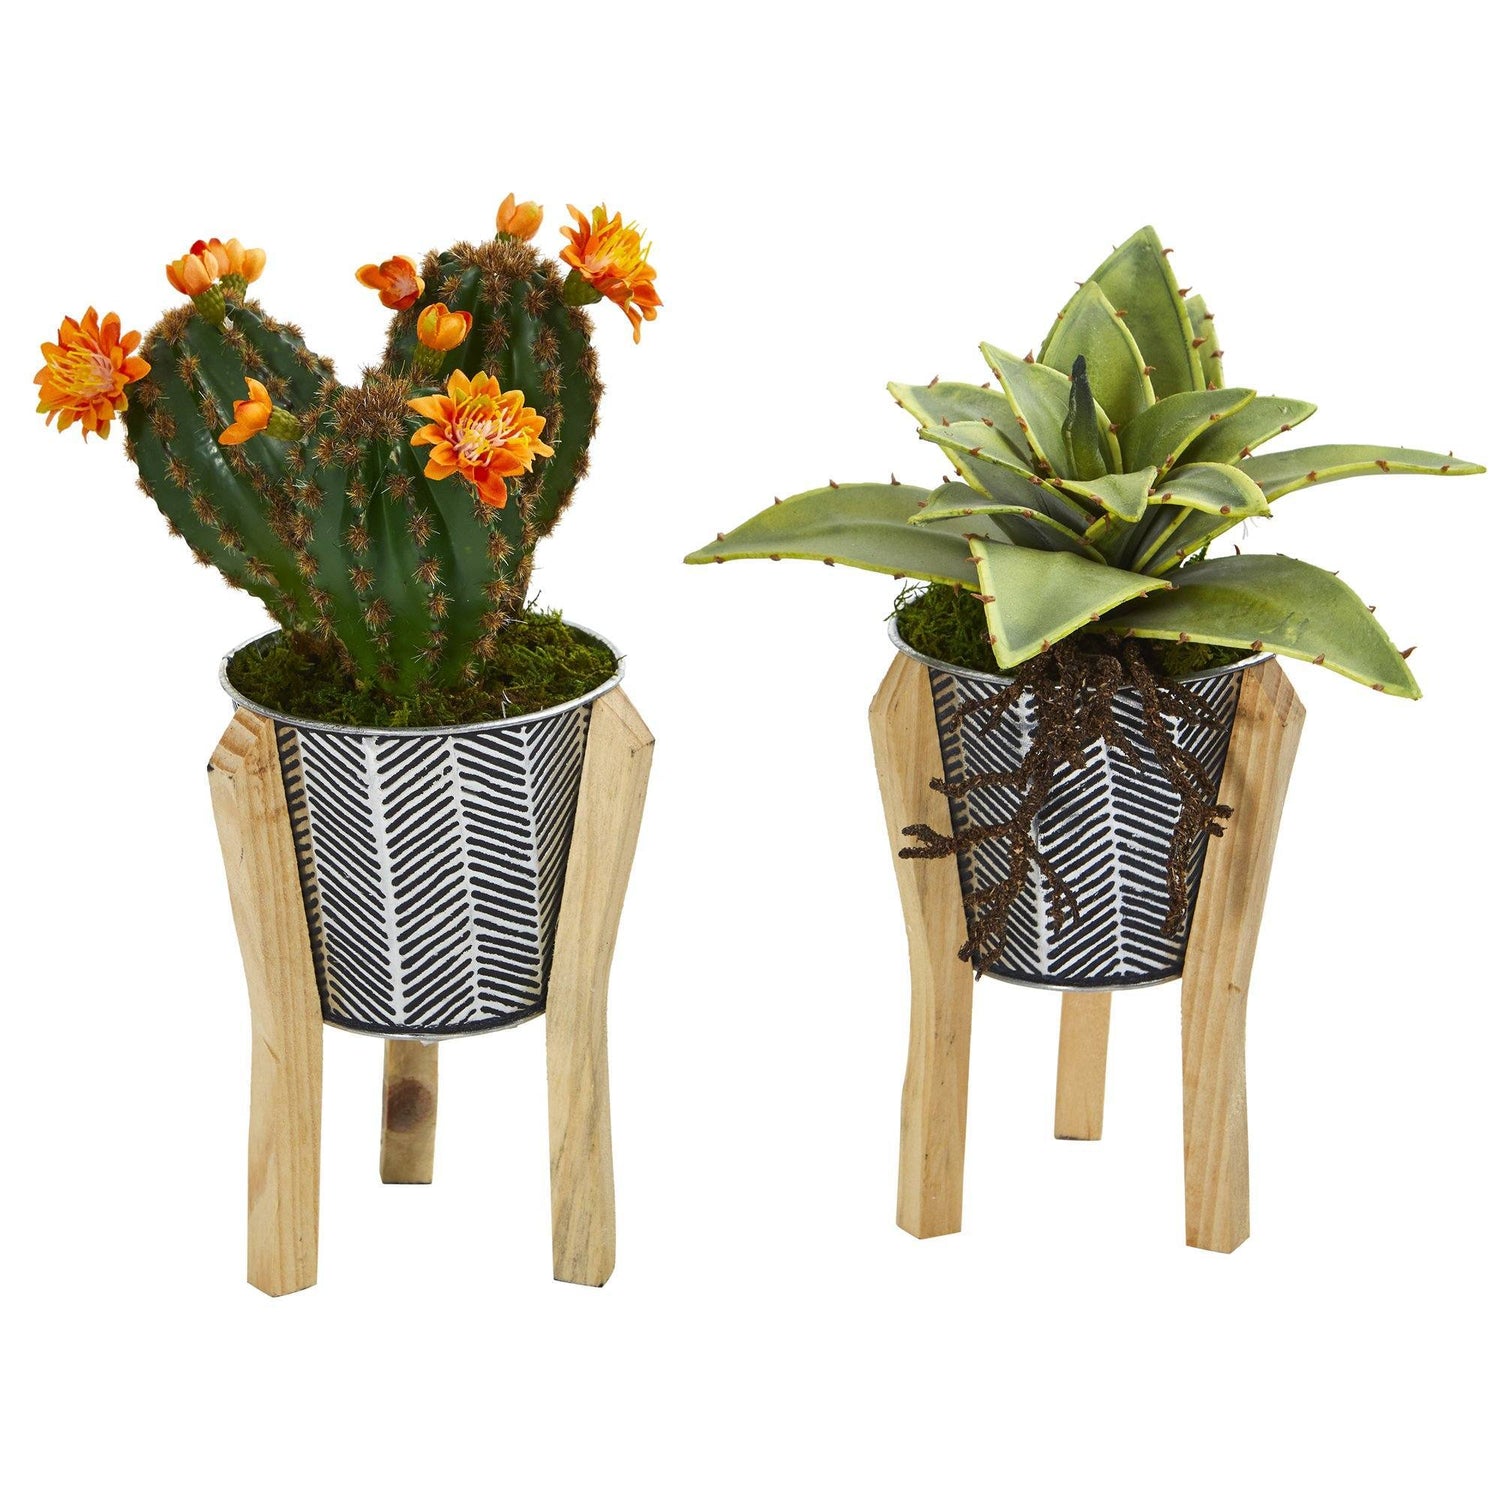 12” Mixed Succulent Artificial Plant in Tin Planter with Legs (Set of 2)